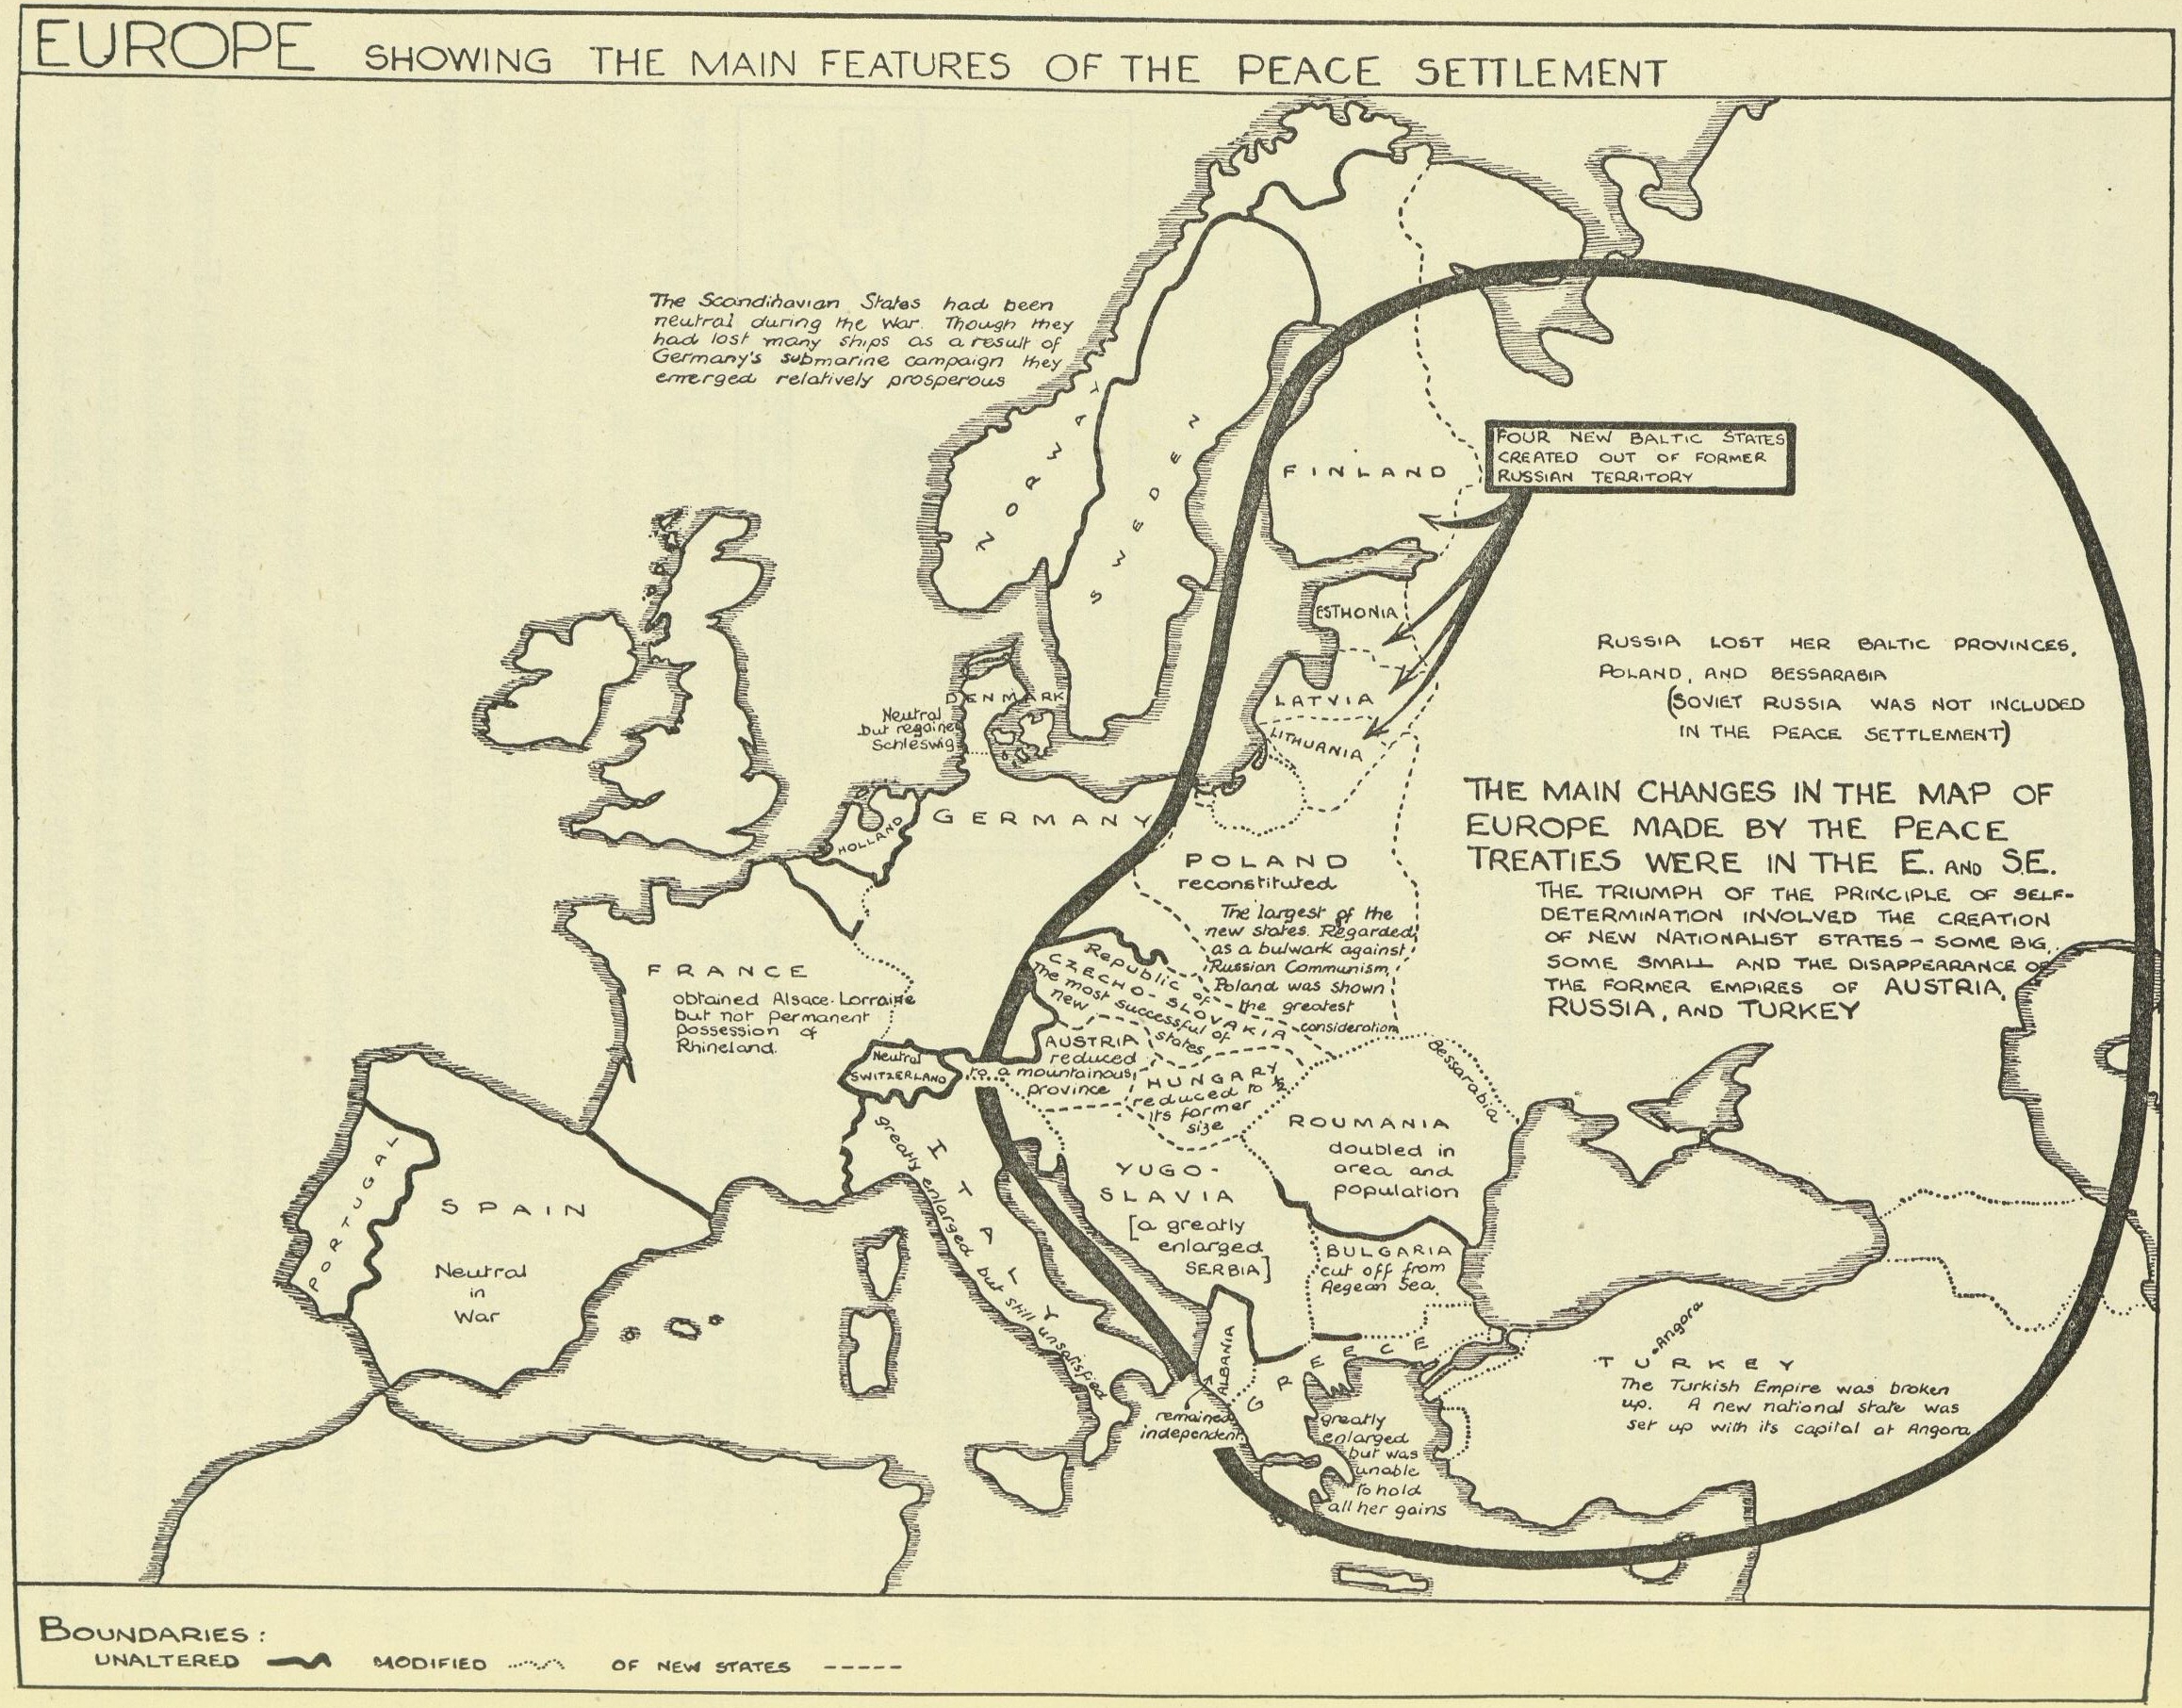 Europe, showing the main features of the peace settlement